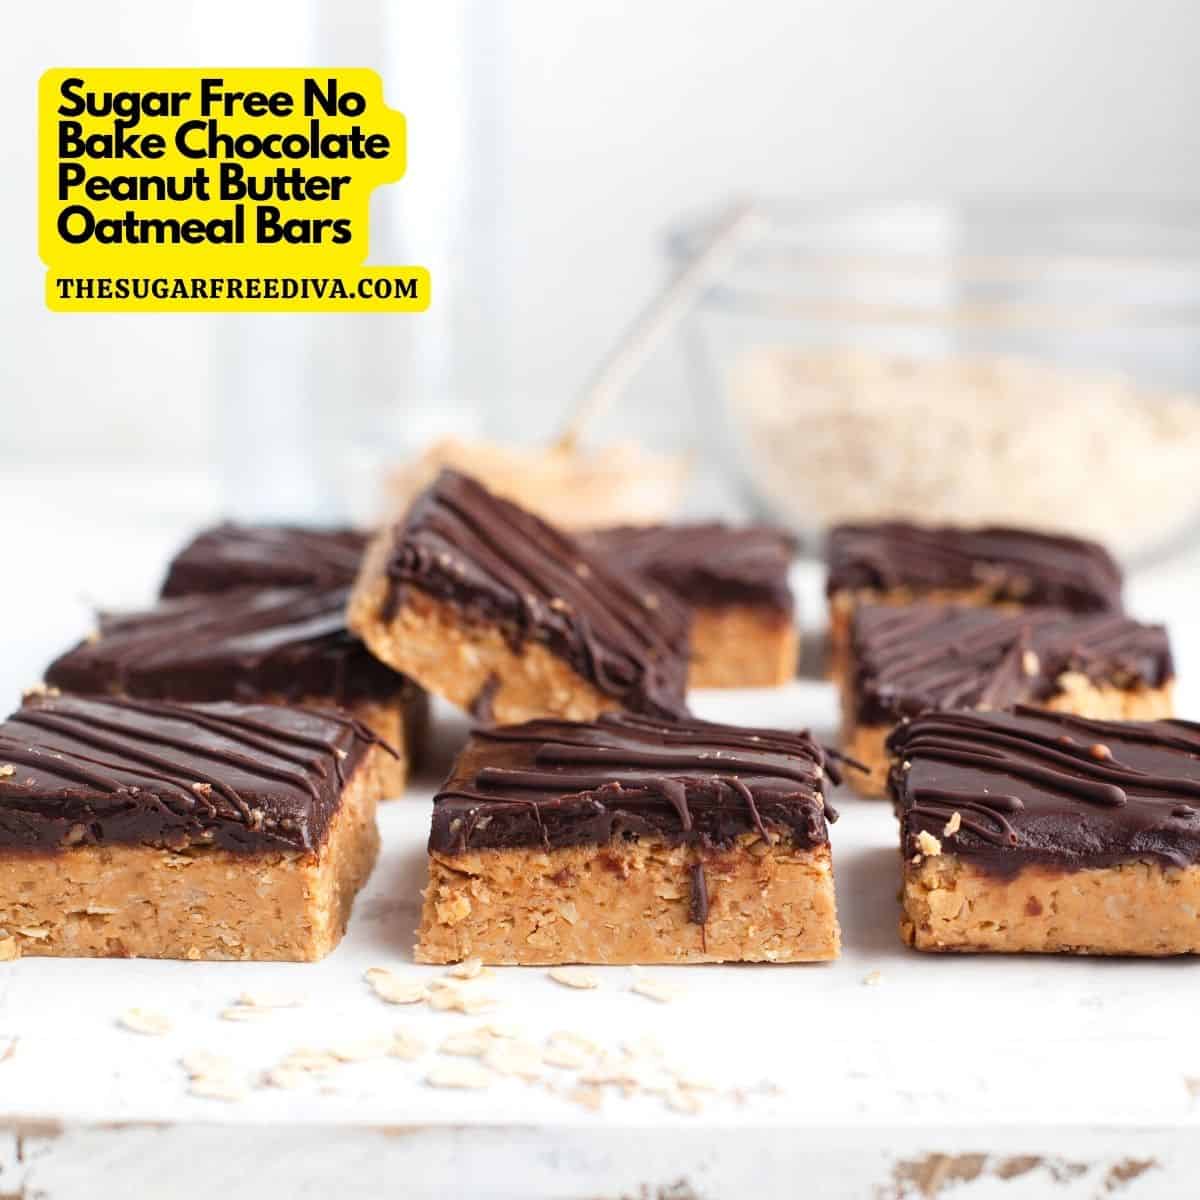 Sugar Free No Bake Chocolate Peanut Butter Oatmeal Bars, a simple dessert or snack recipe made with healthy ingredients.